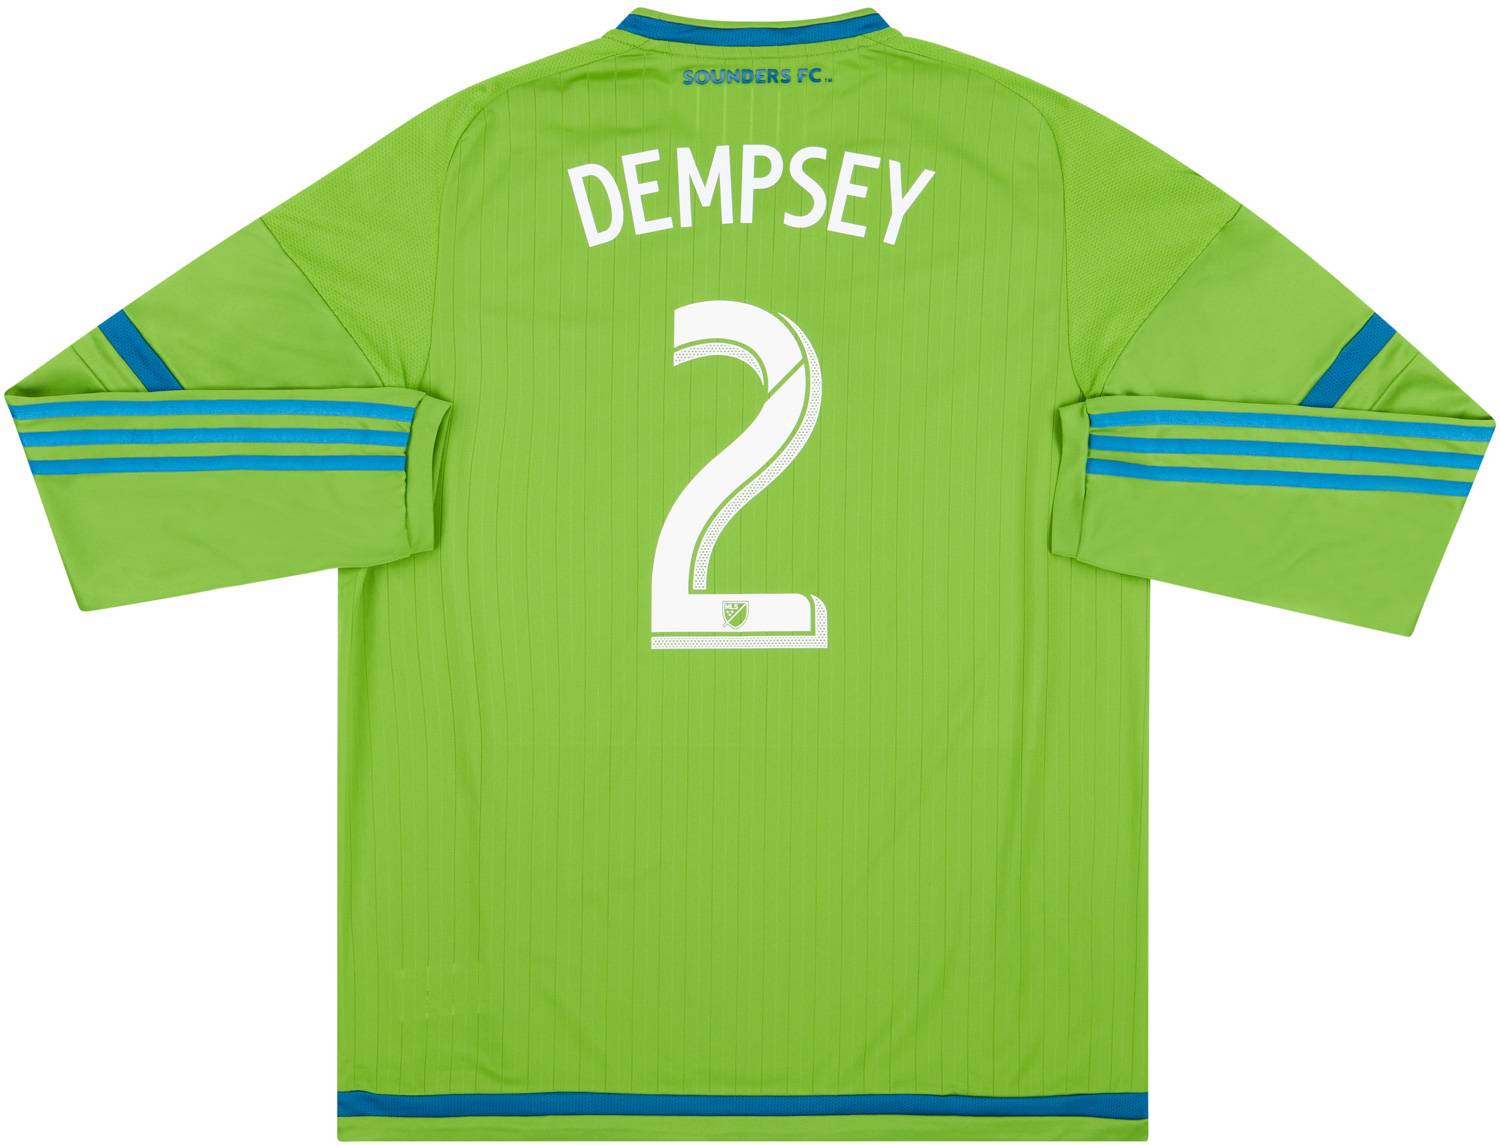 2015 Seattle Sounders Adizero Player Issue Home Shirt Dempsey #2